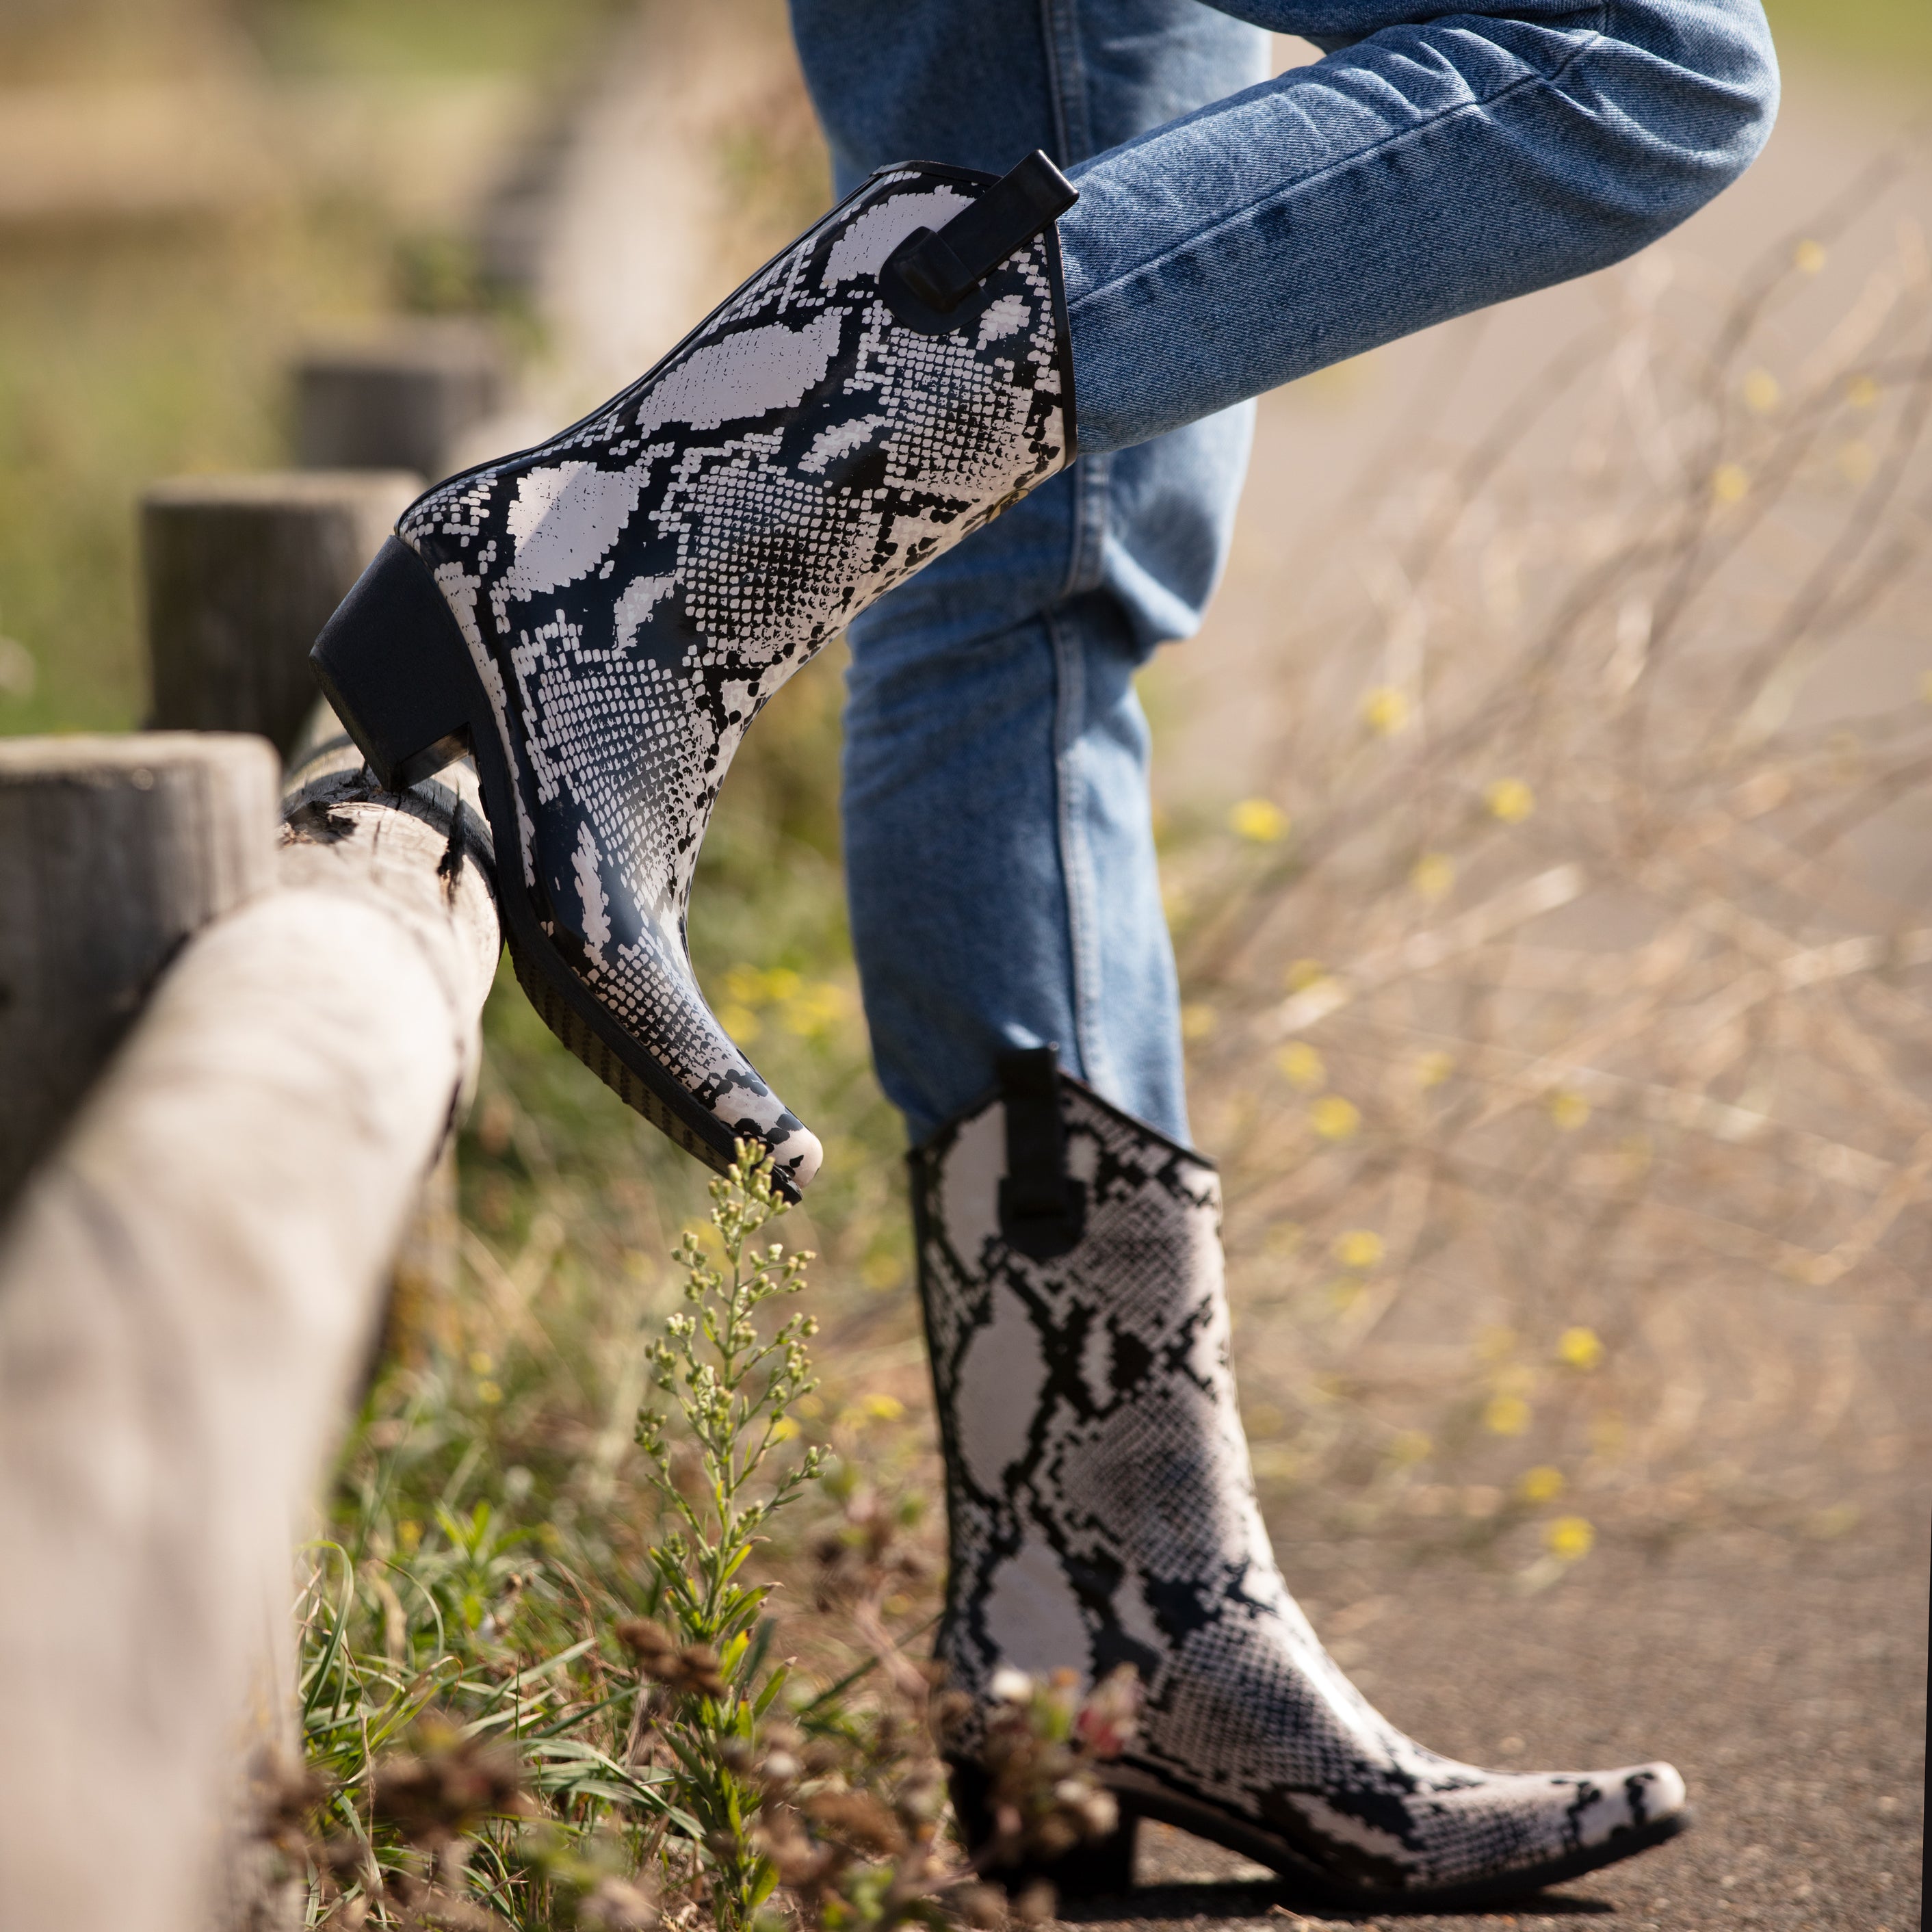 Chic and stylish, these Talolo Women's Bandy snake patterned black and white cowboy welly boots have a 3cm heel and will reach the middle of the calf. Cut close to the leg for a hot flattering look.  Lined for comfort.